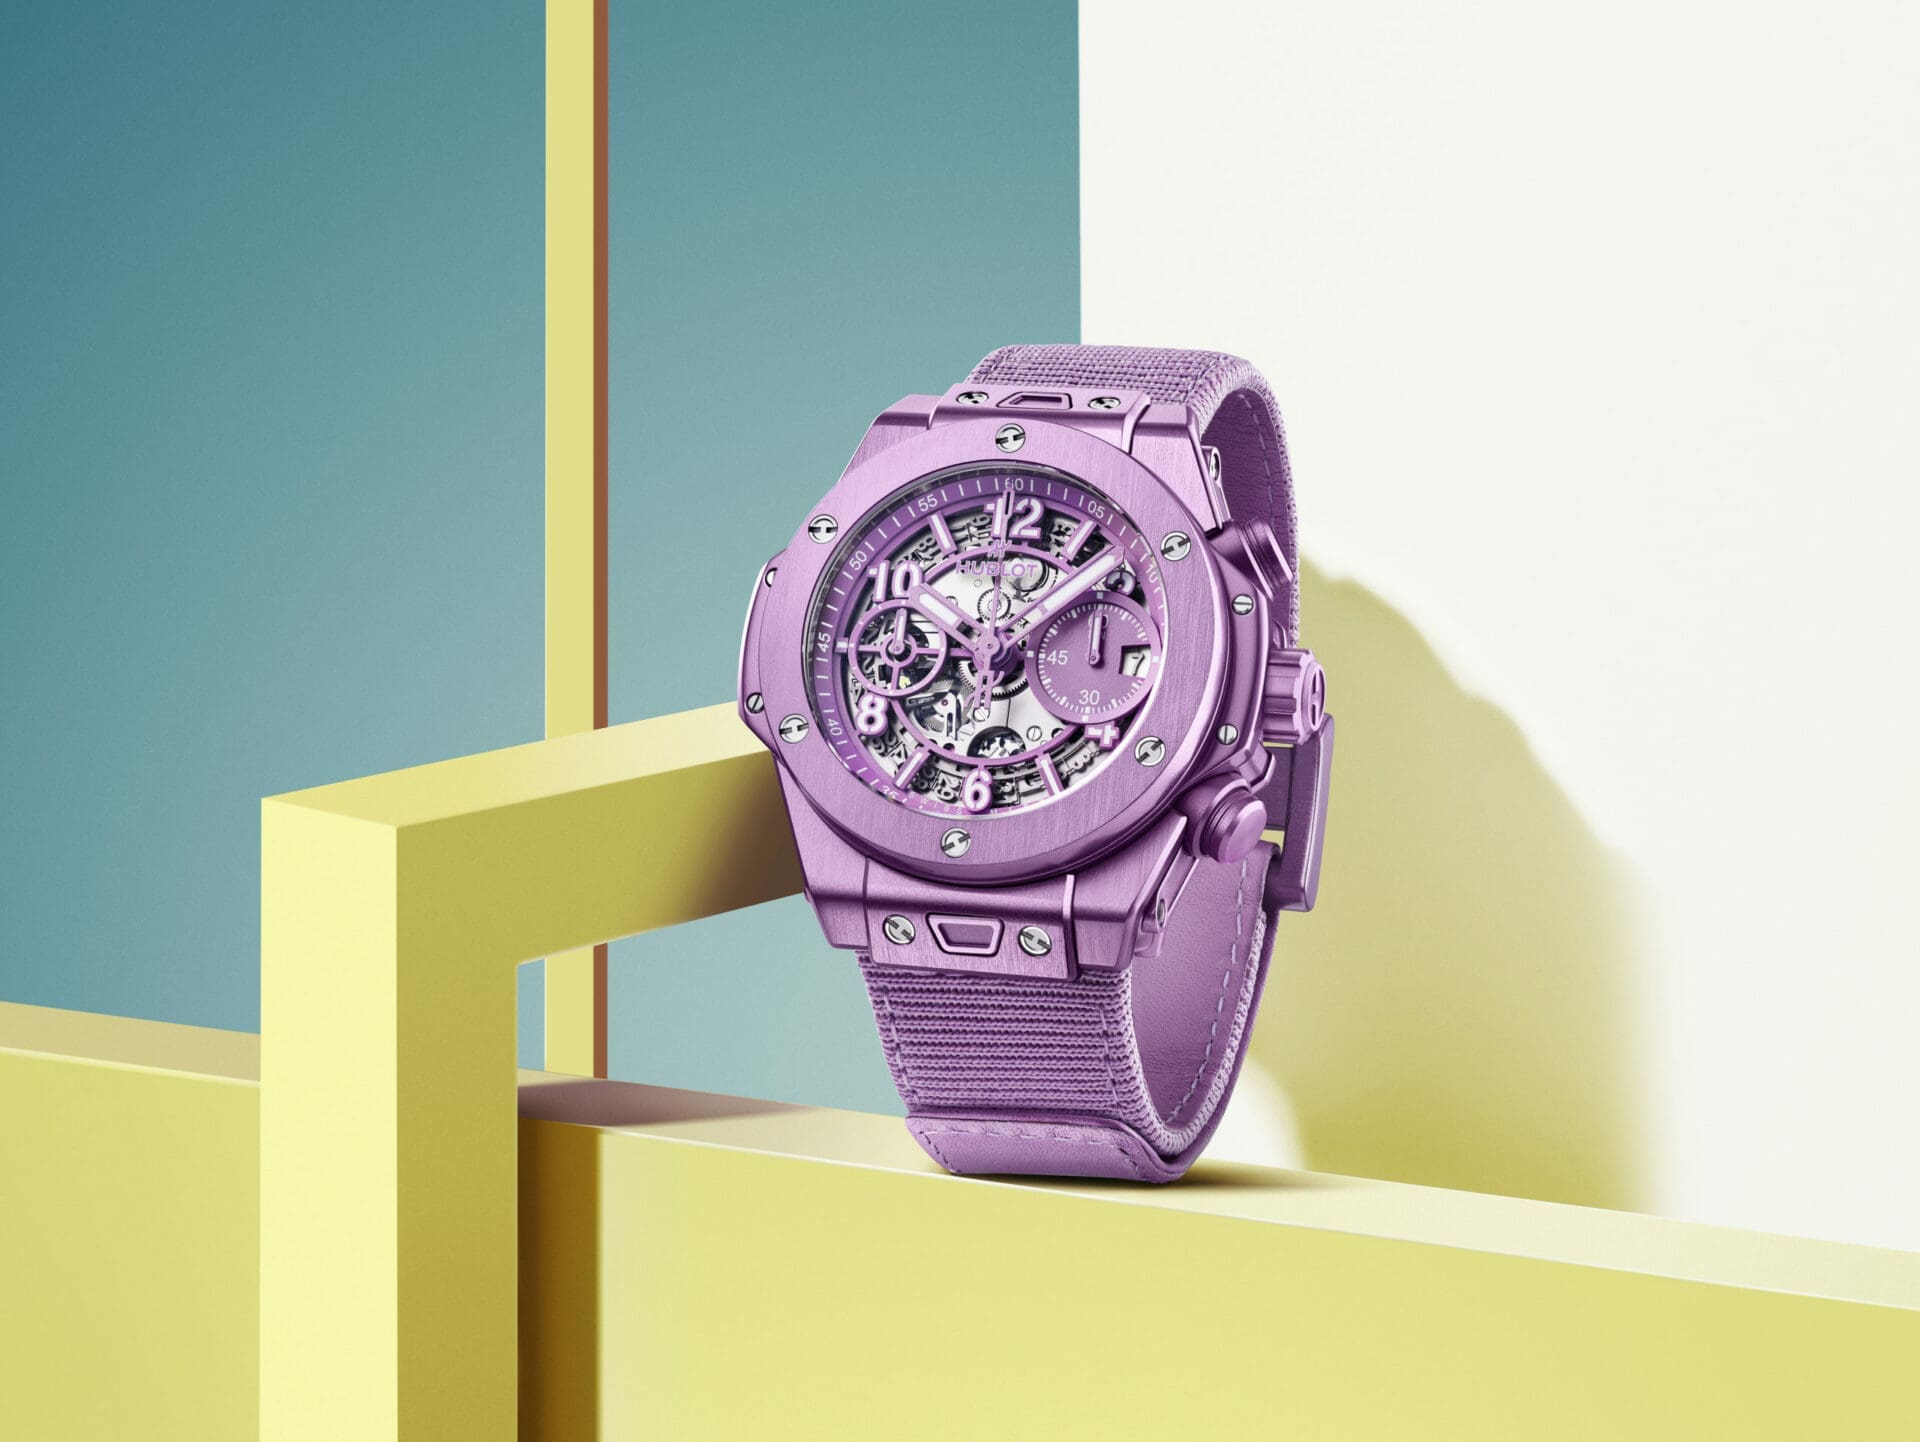 INTRODUCING: The Hublot Big Bang Unico Summer Purple is not for shrinking violets